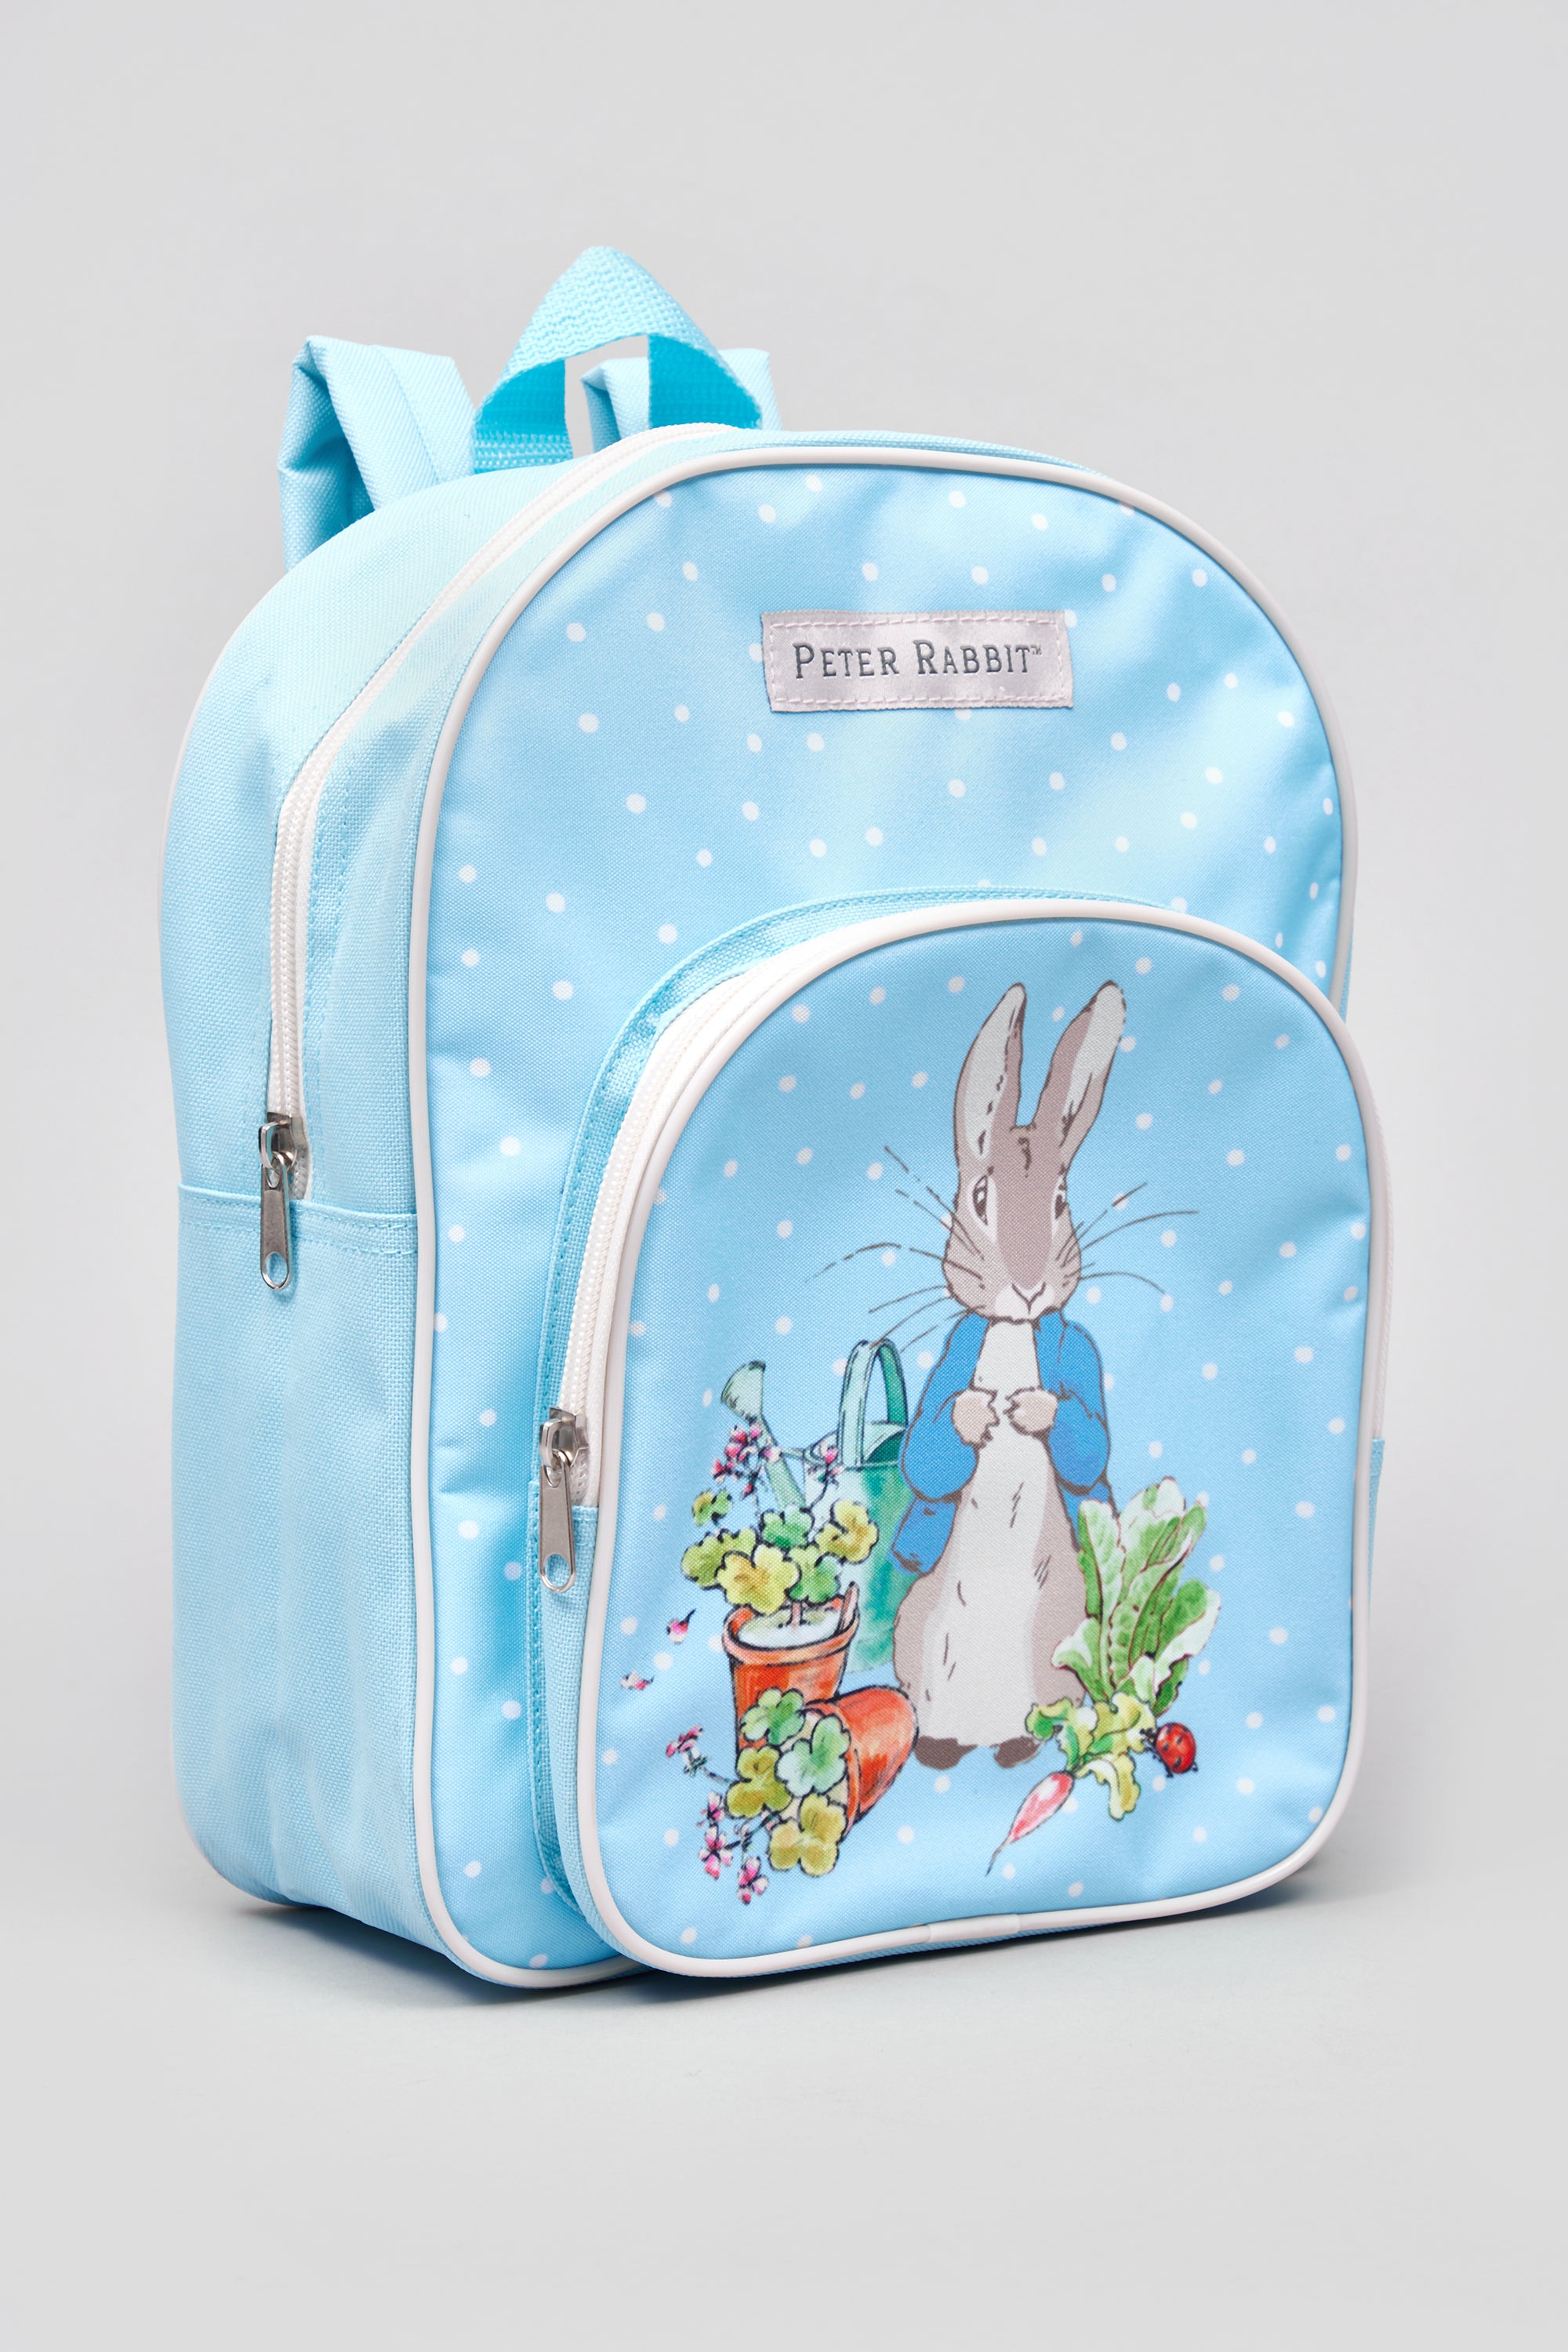 PETER RABBIT BLUE POLKA DOT CLASSIC ARCH BACKPACK